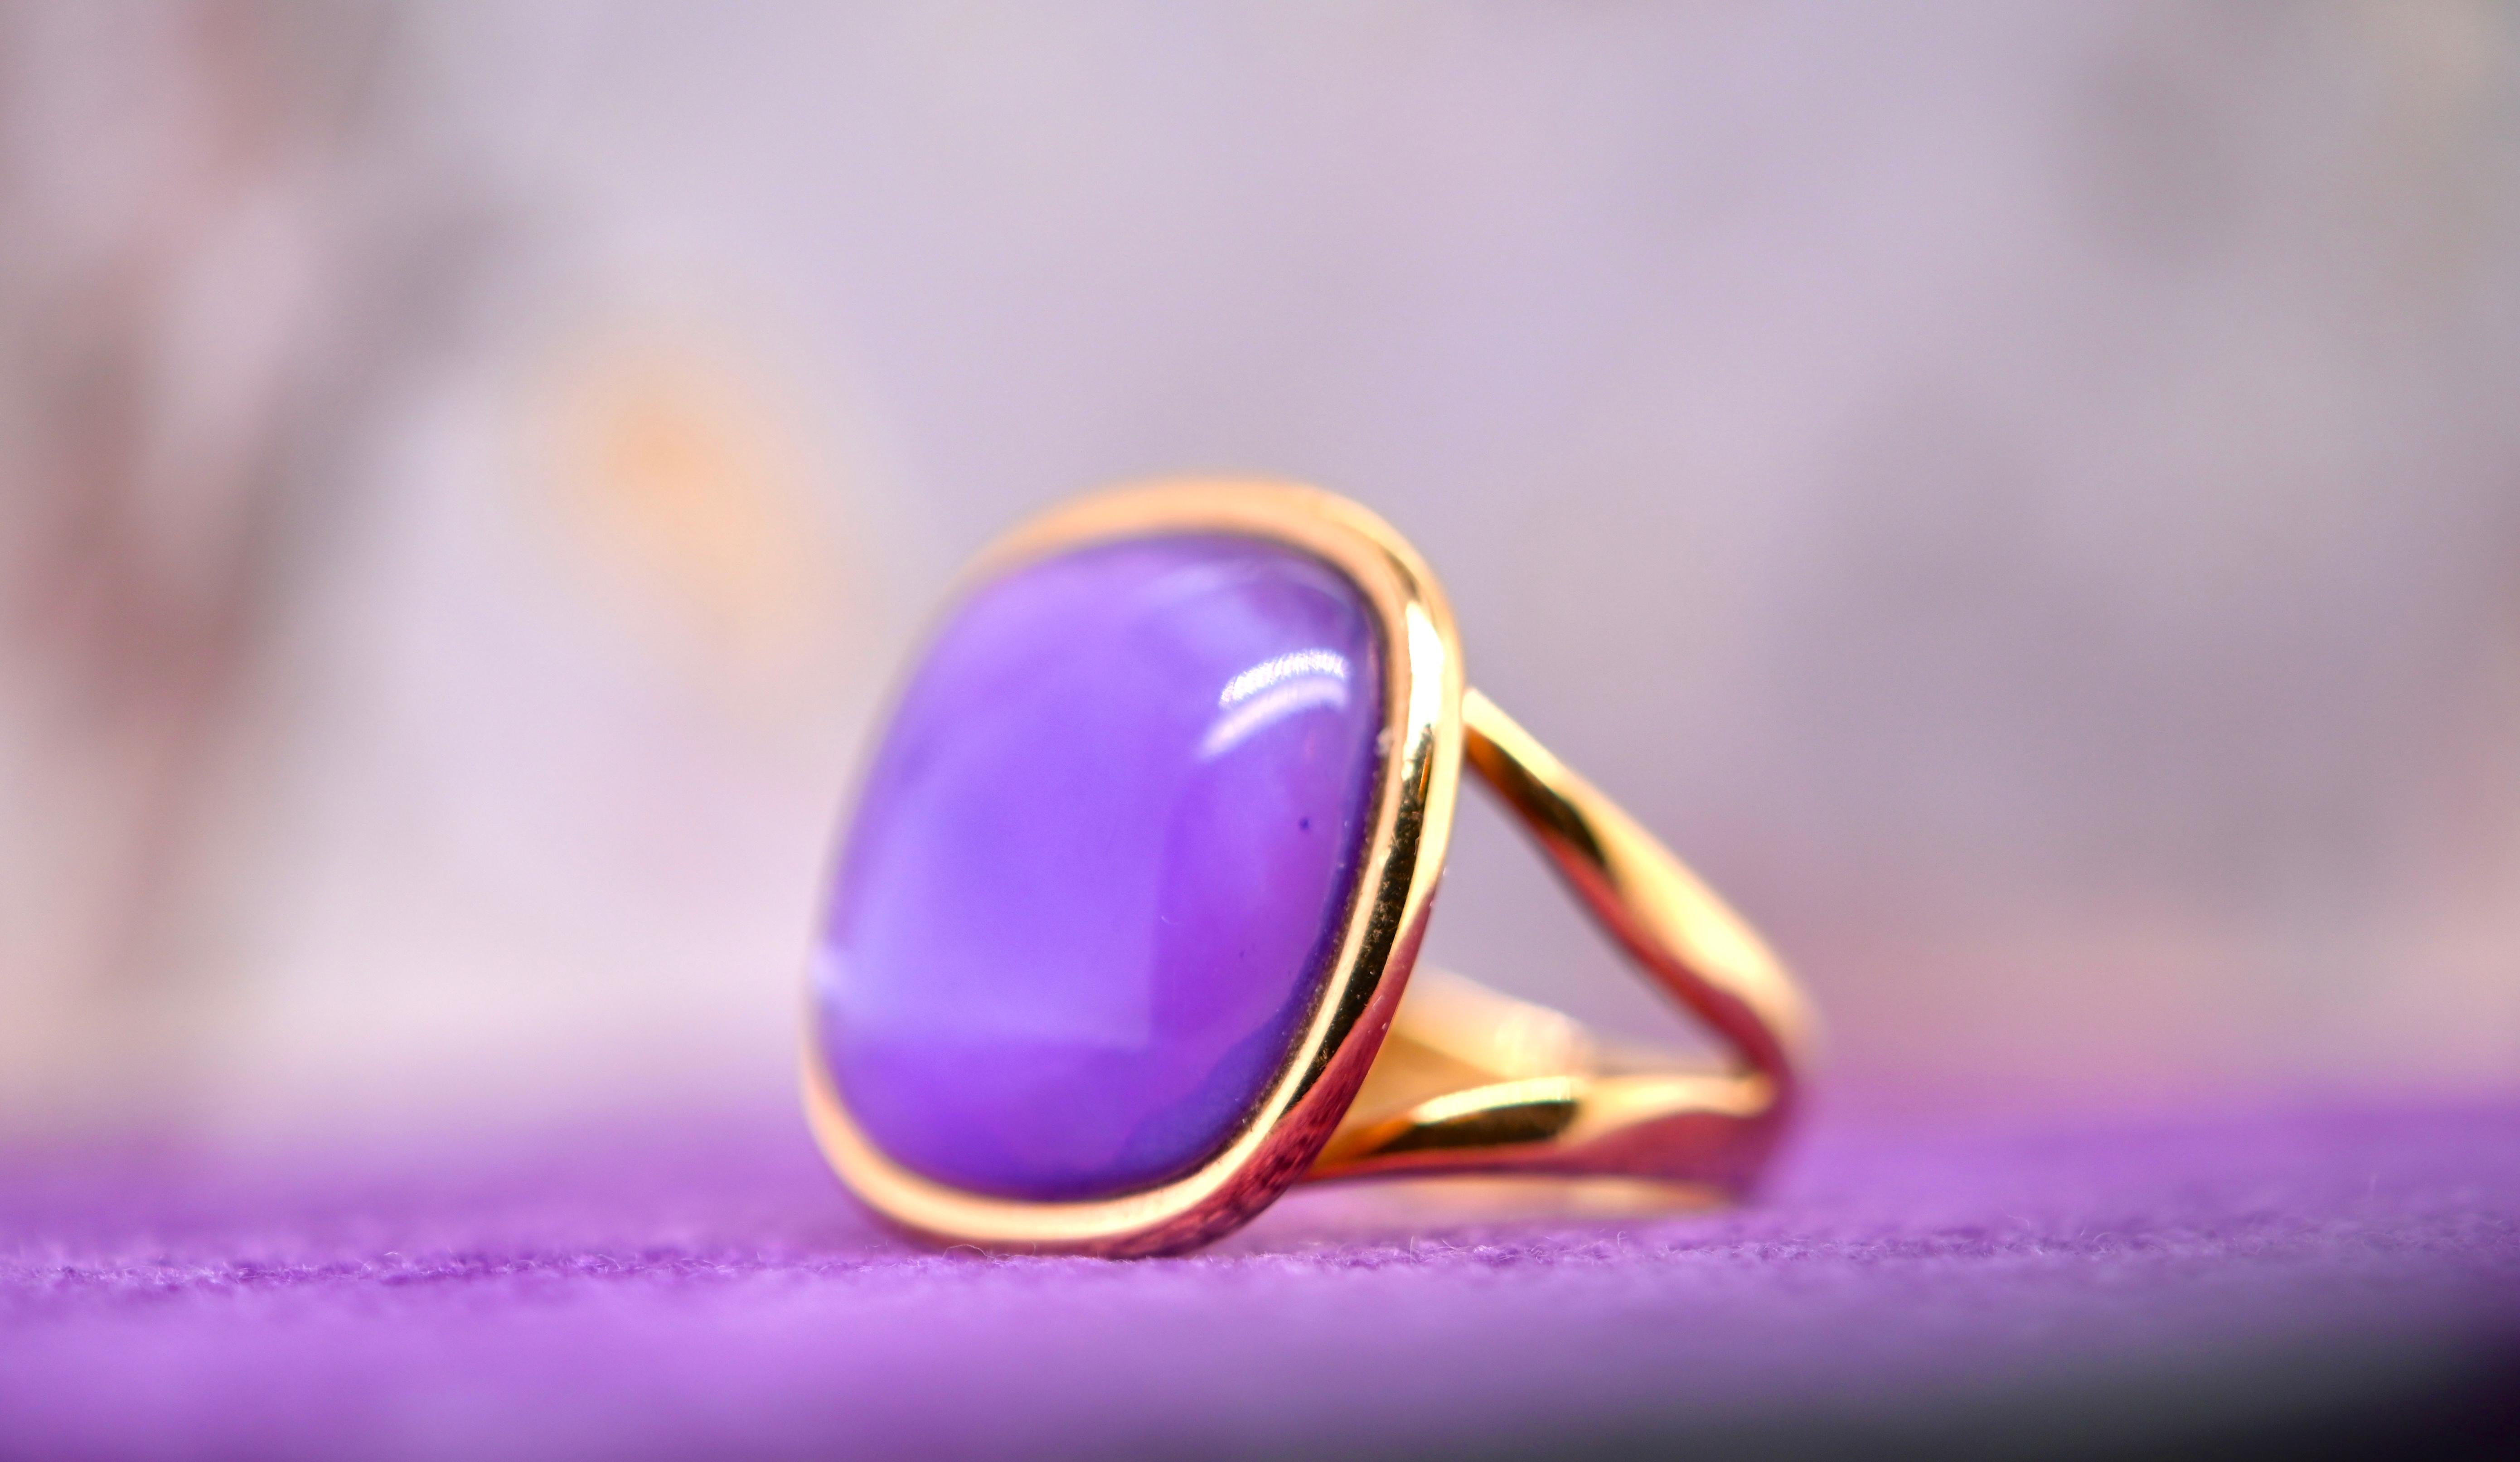 This ring combines the timeless elegance of 18-carat rose gold with the bewitching natural beauty of amethyst. A jewel that's sure to captivate the eye and reflect the radiance of your unique personality.

The weight of the rose gold used to craft